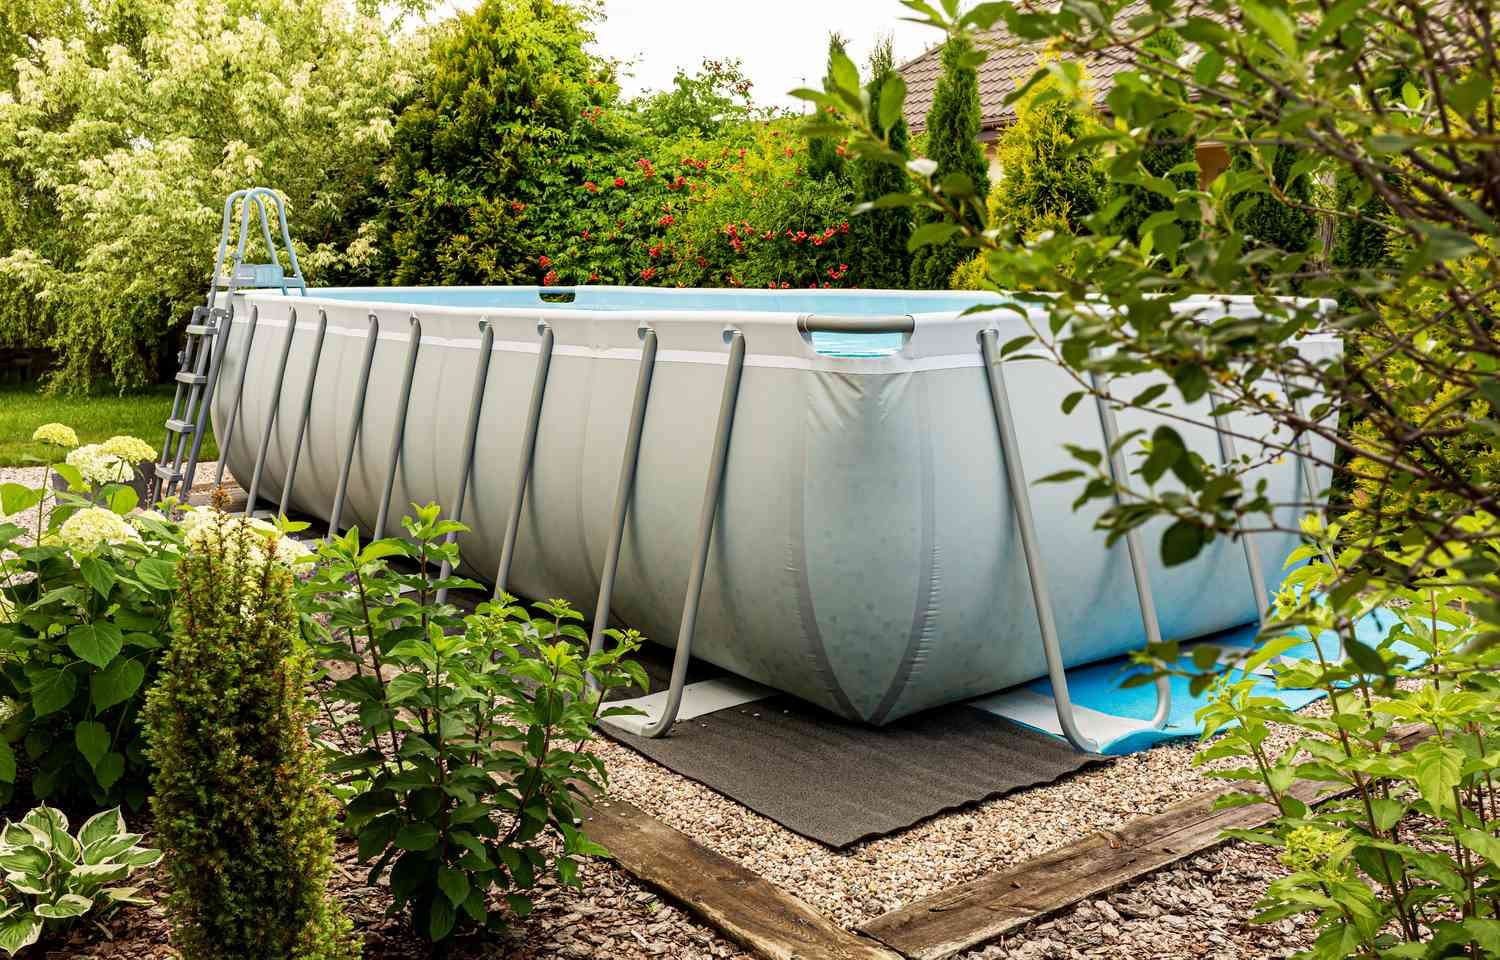 Above-Ground Pool Landscaping Ideas From Minimal to Lush